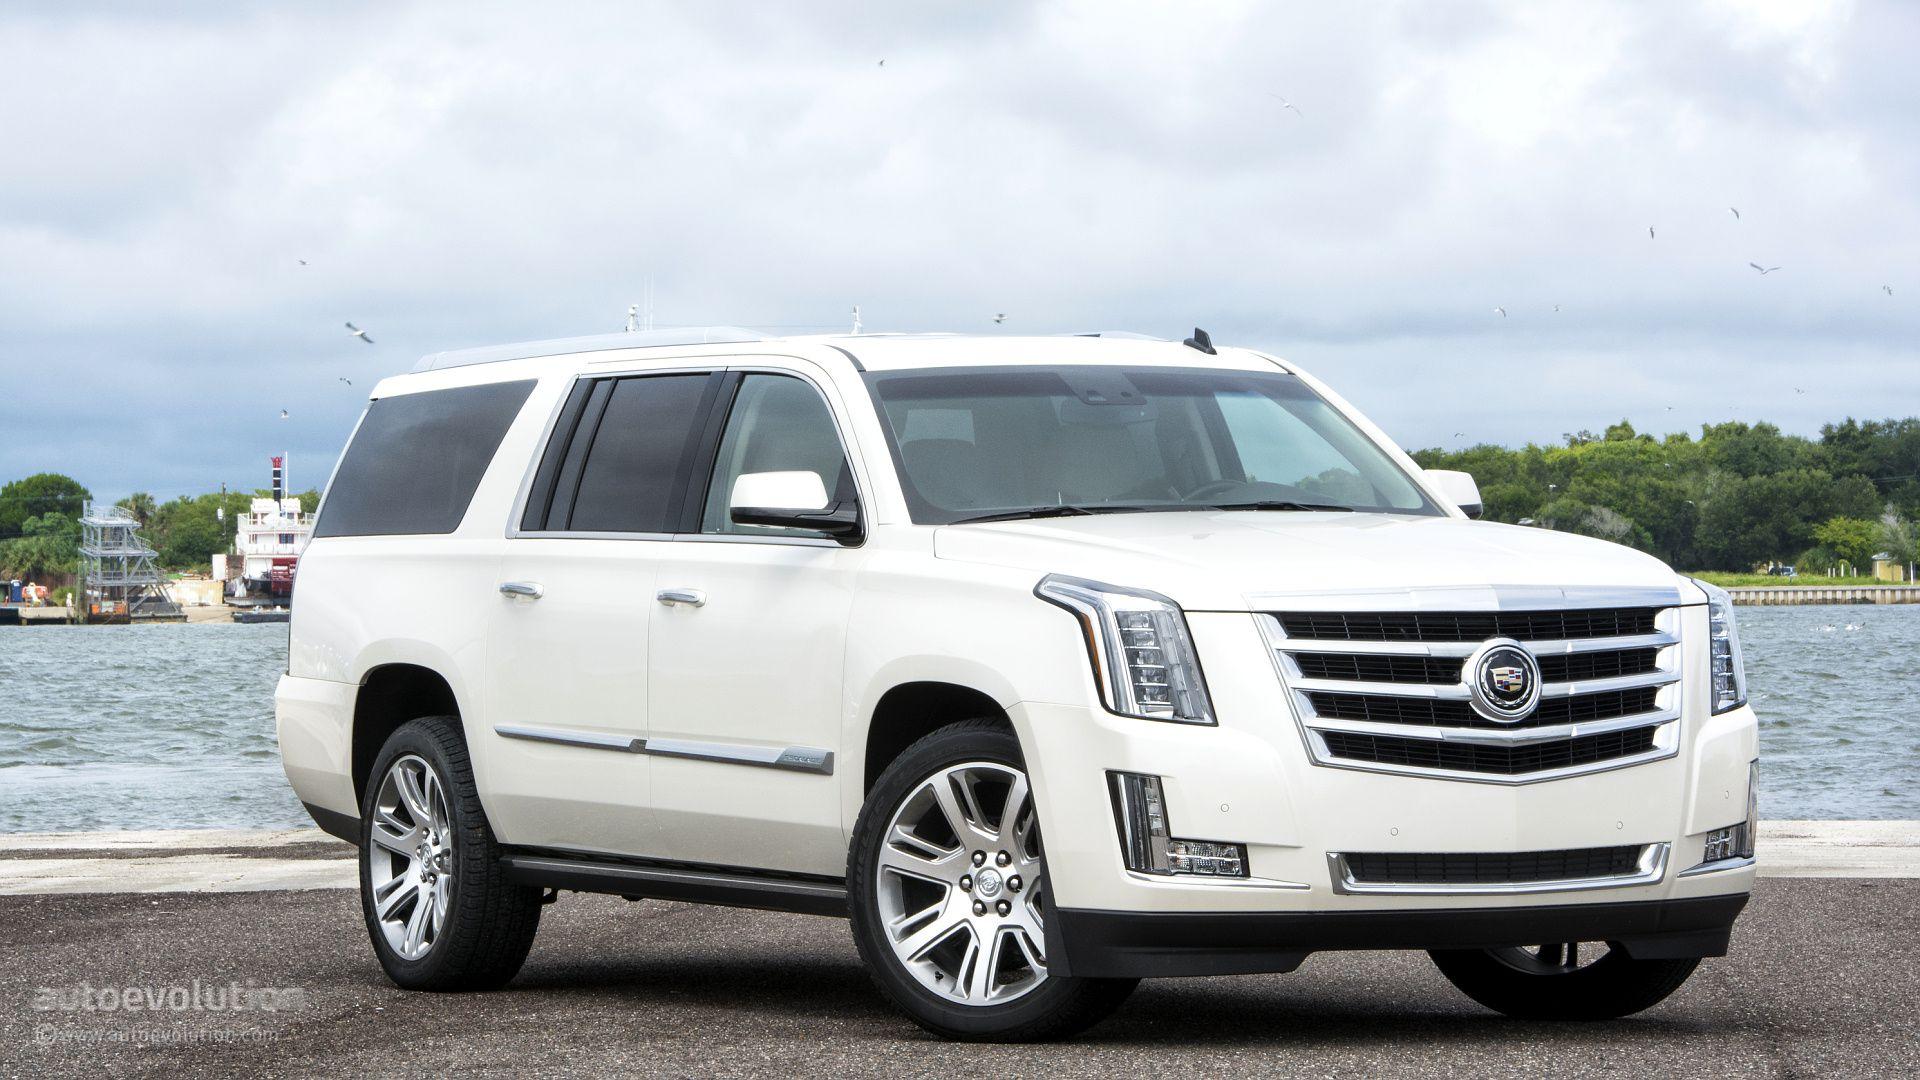 Cadillac Escalade HD Wallpaper: When Luxury Meets Full Size